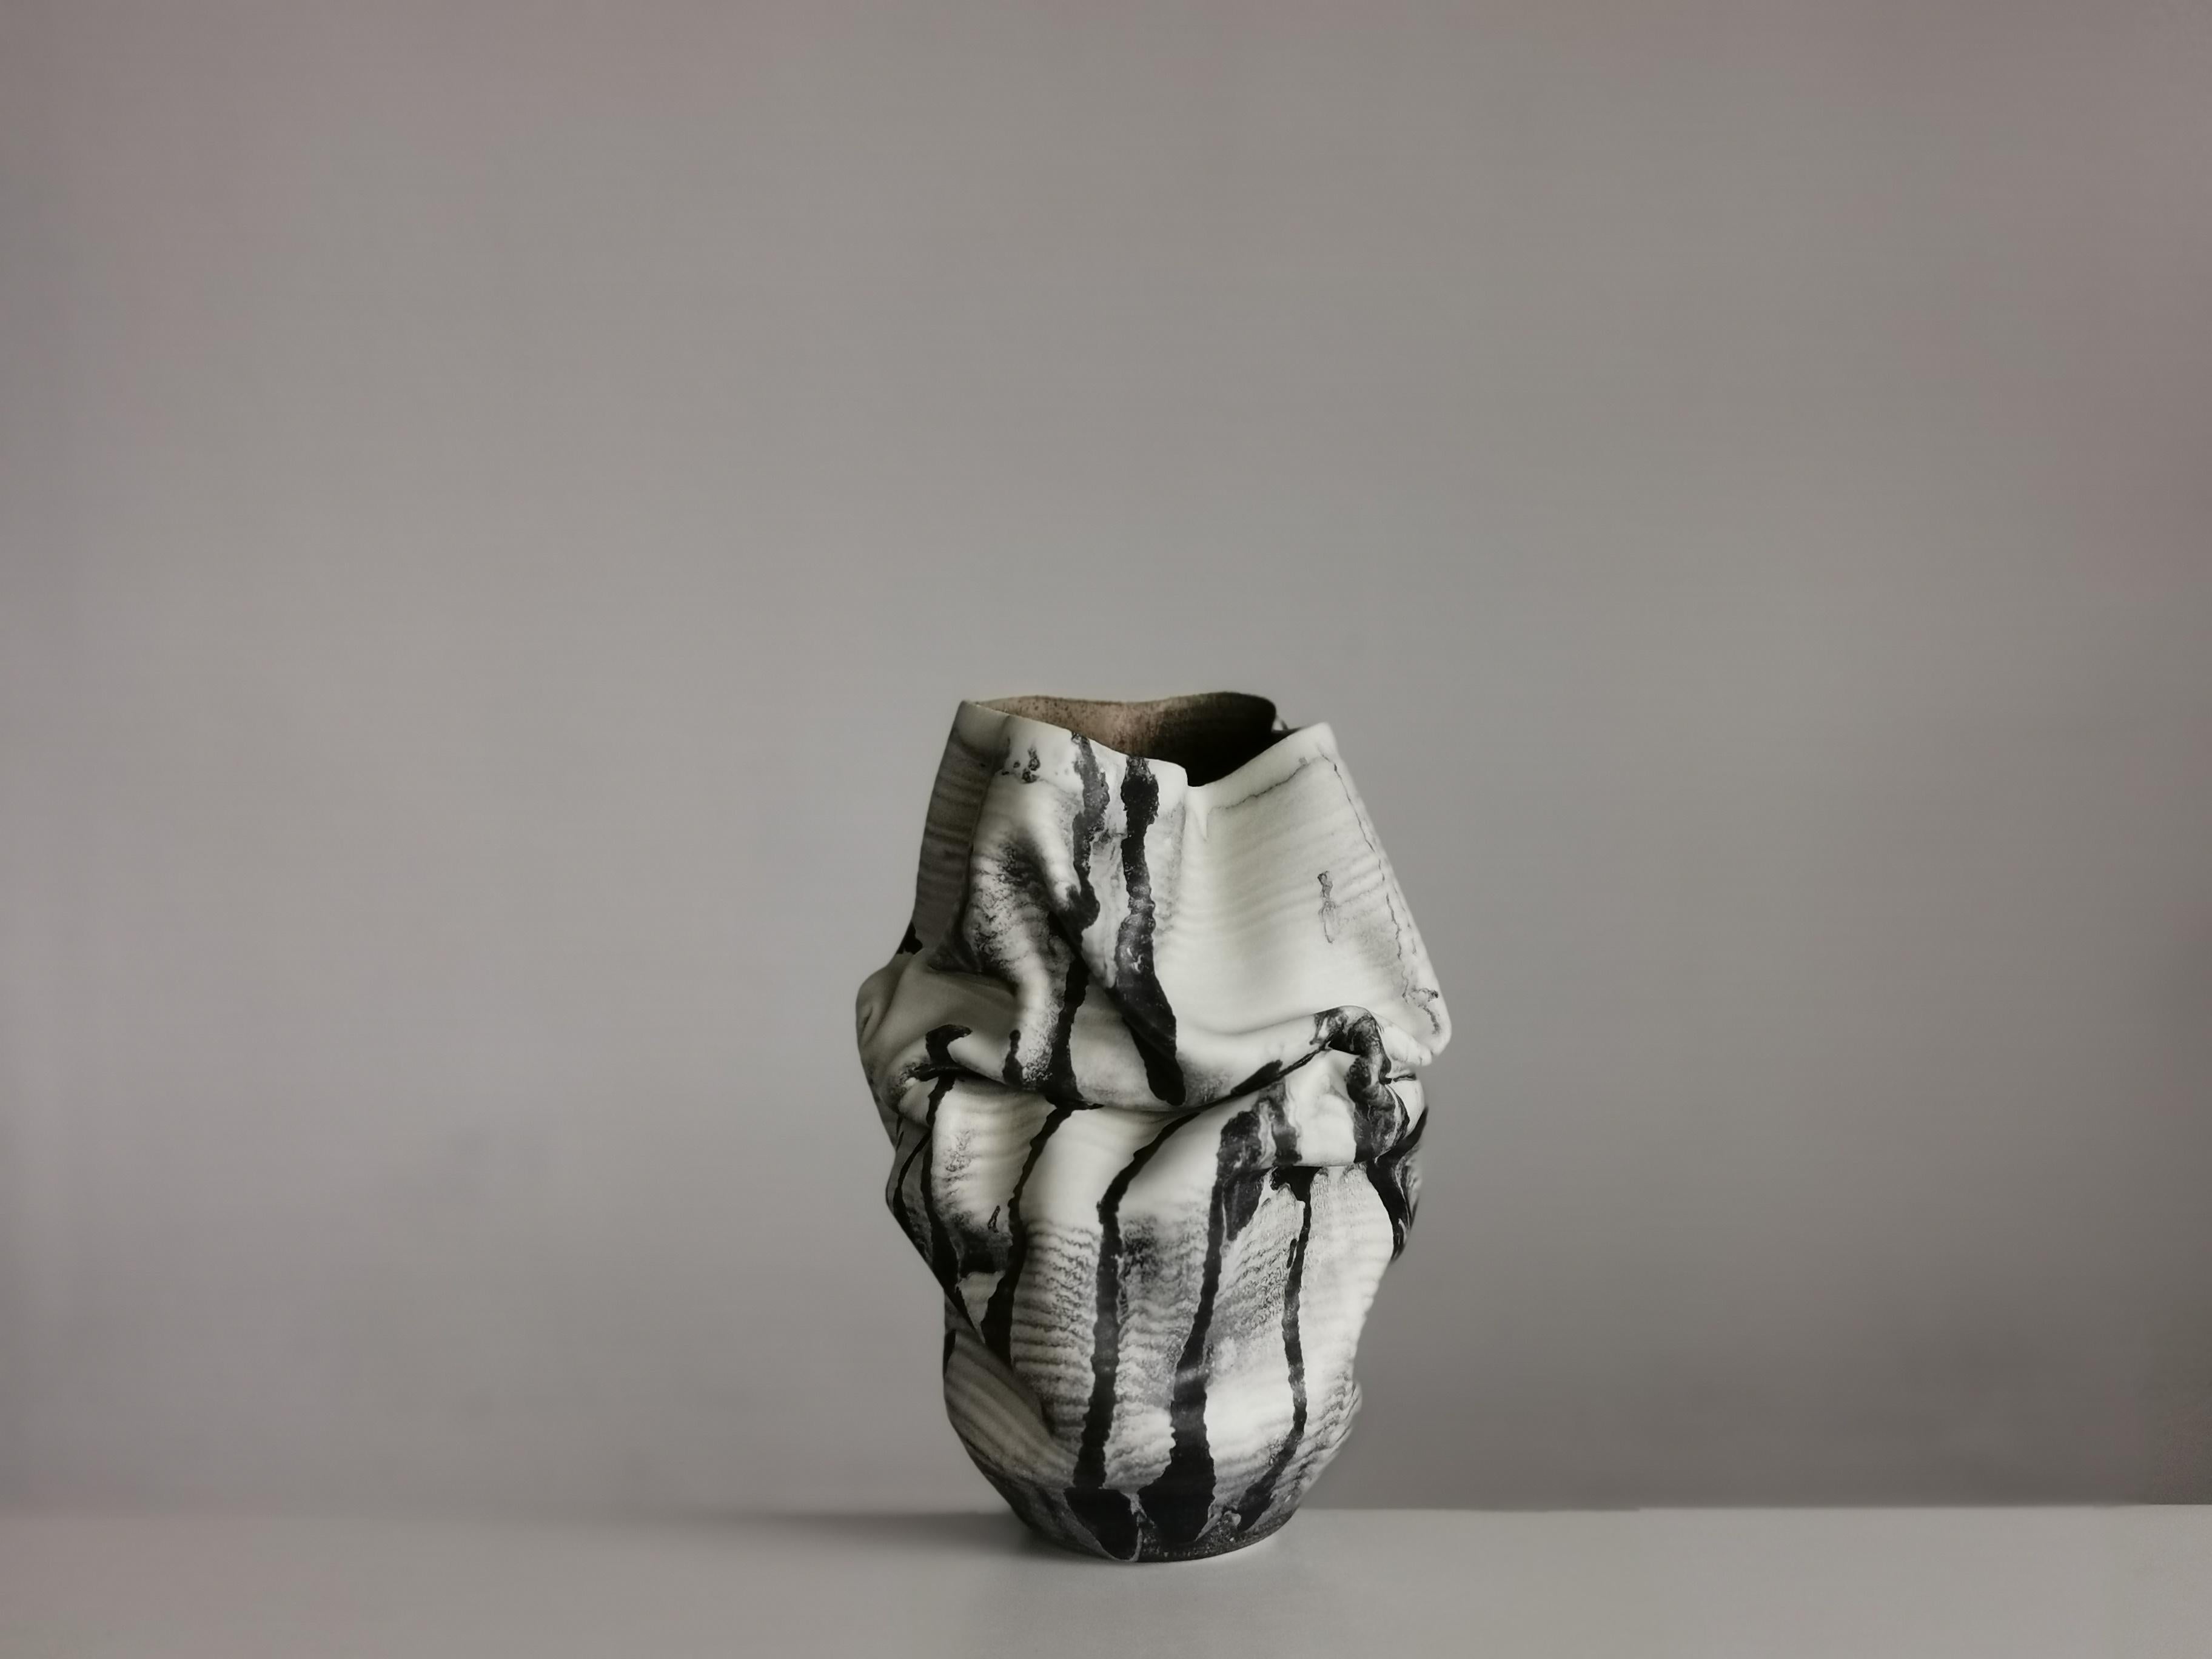 Other White Dehydrated Form Black Marking, Unique Ceramic Sculpture Vessel N.75